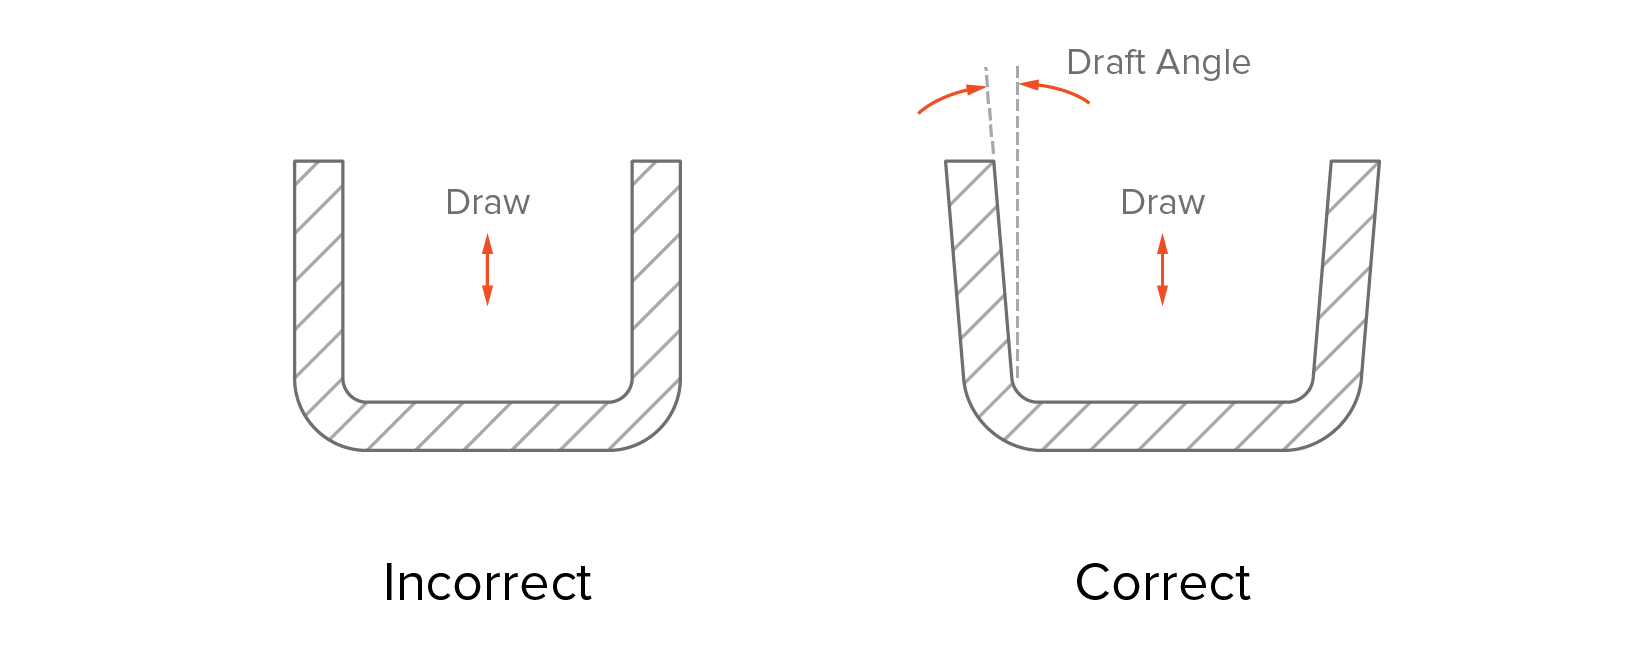 Add a draft angle (minimum 2o)to all vertical walls